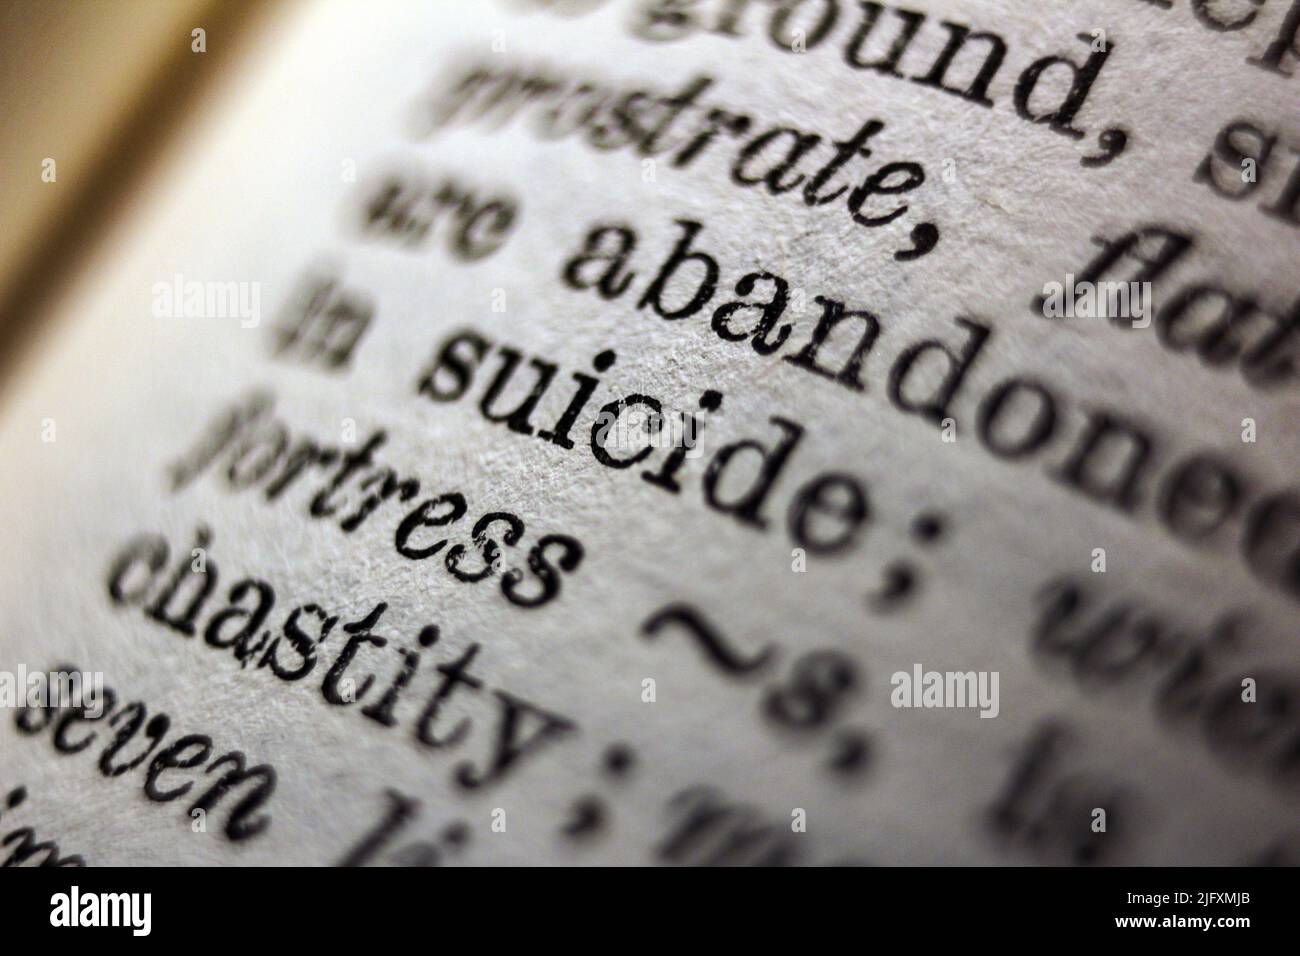 Word 'suicide' printed on dictionary page, macro close-up Stock Photo